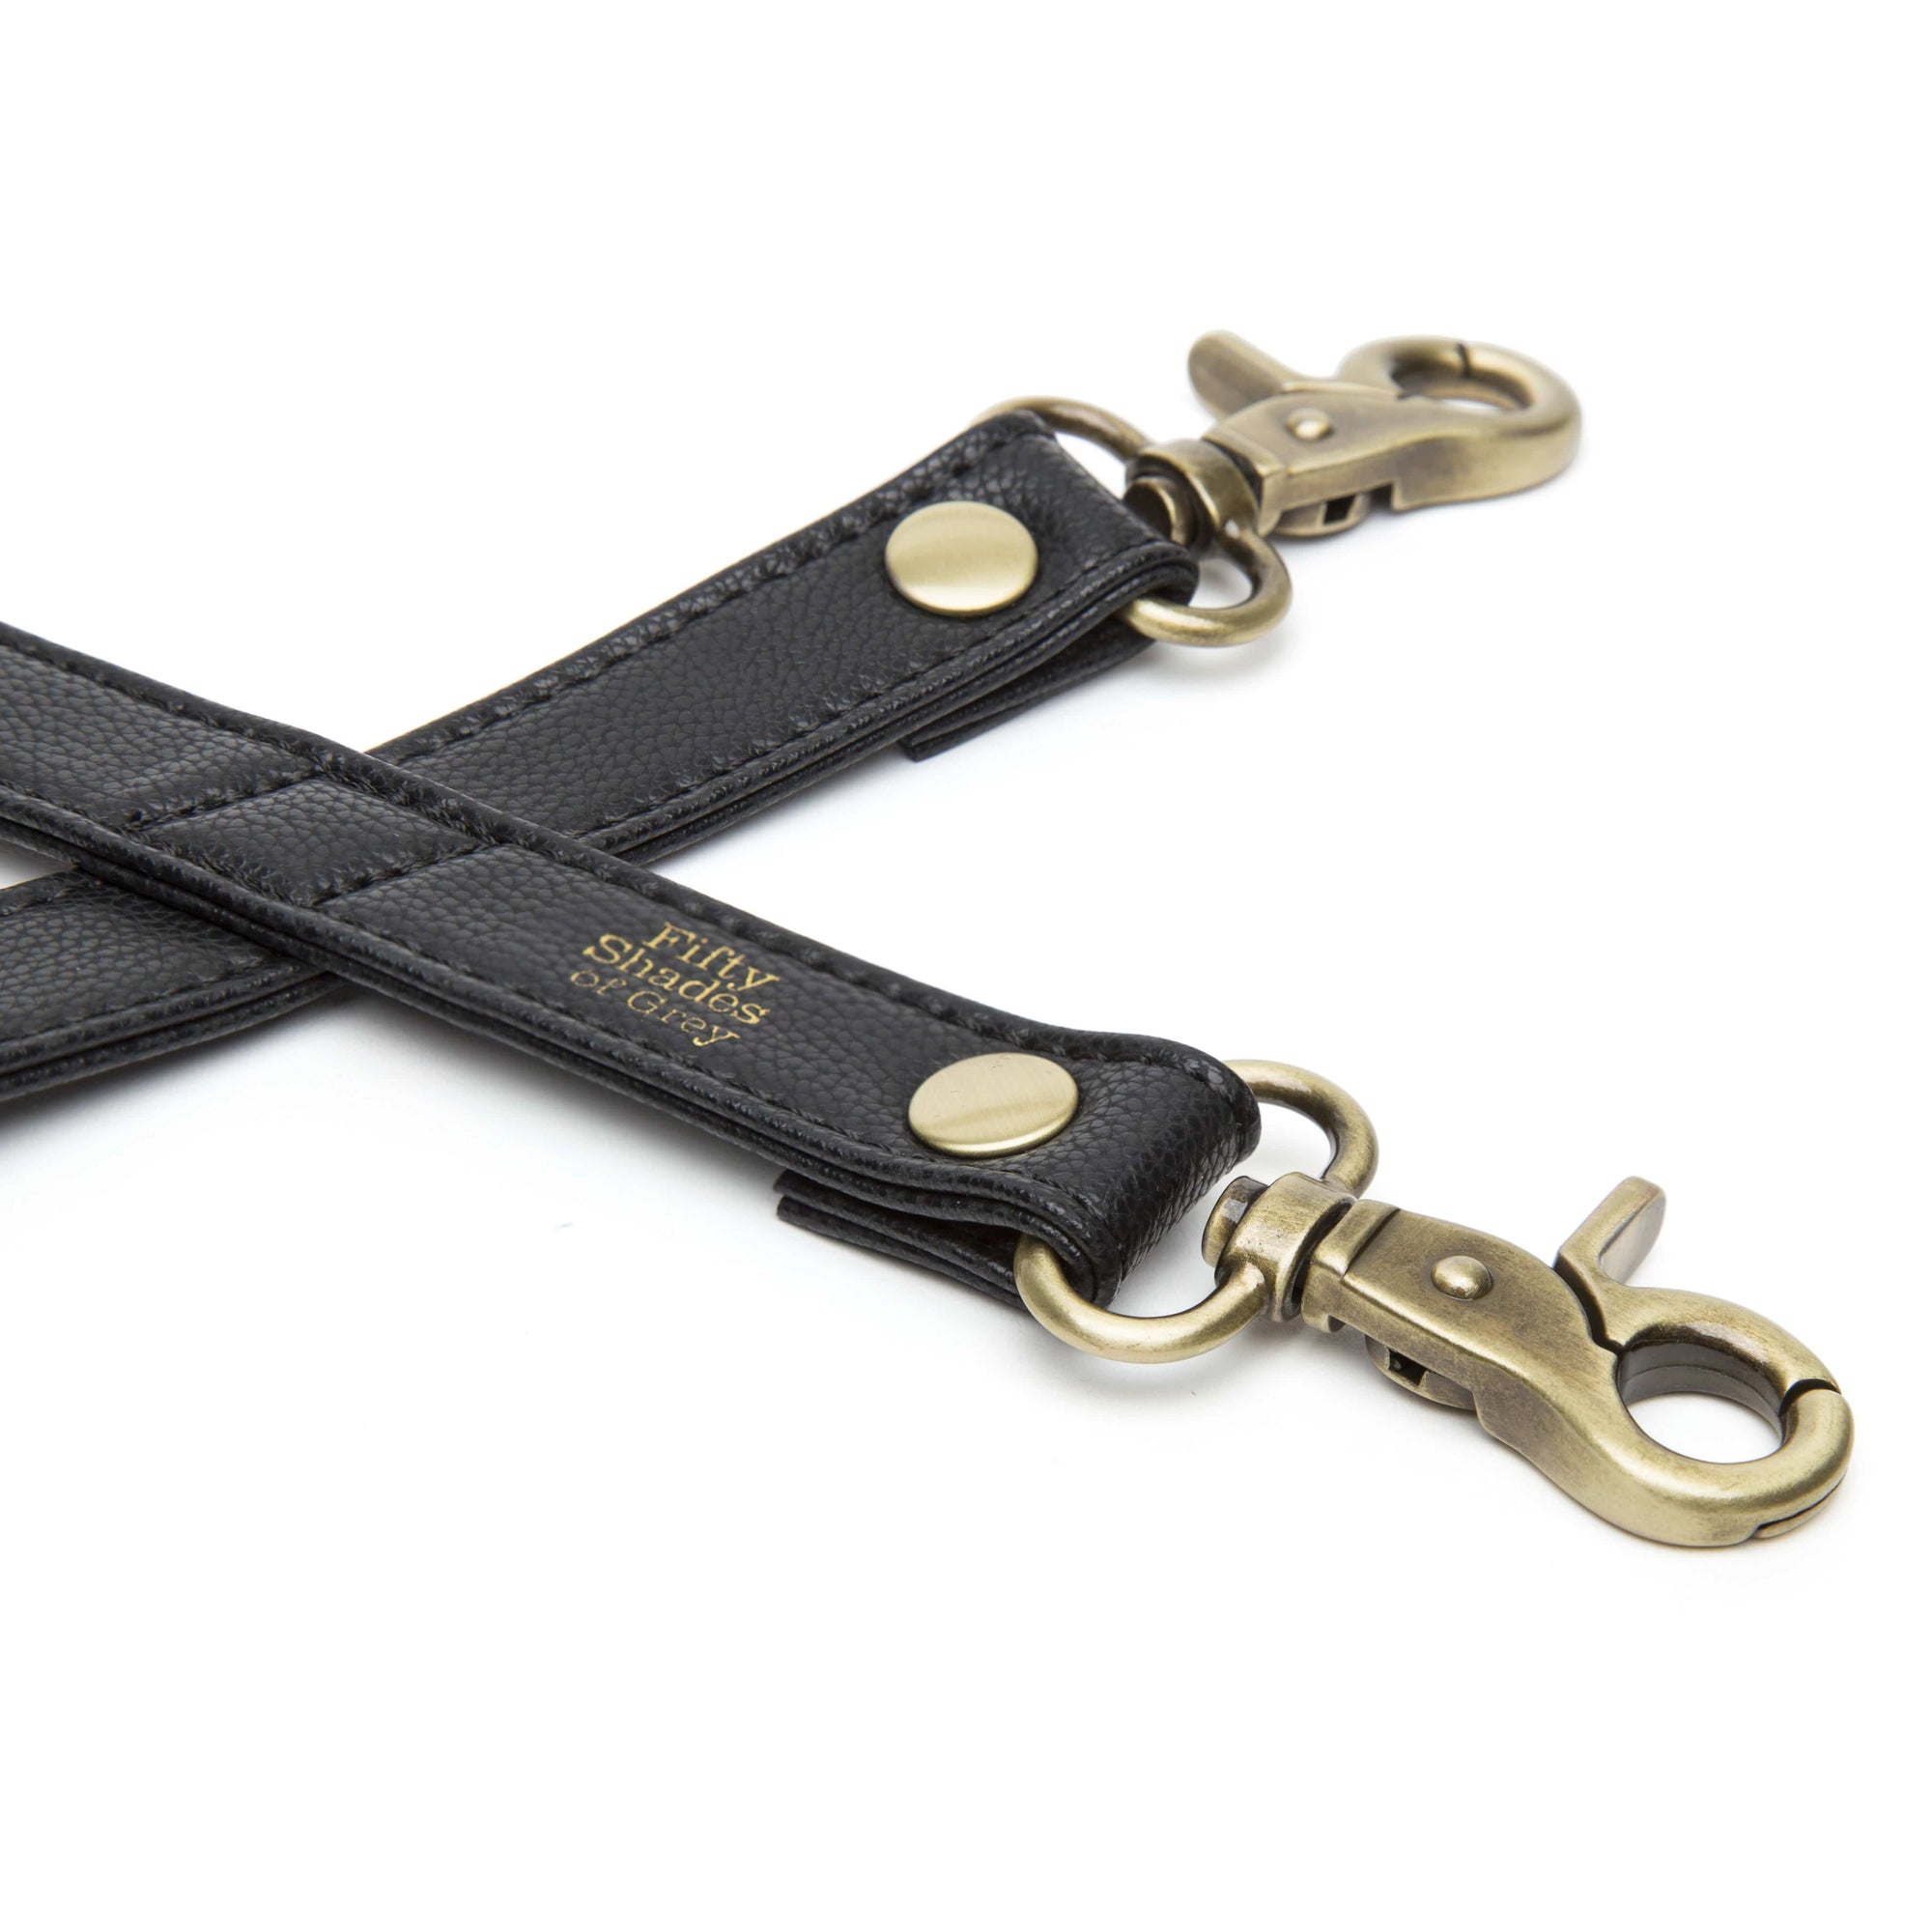 Fifty Shades of Grey - Bound to You Hog Tie (Black) BDSM (Others) 319991347 CherryAffairs